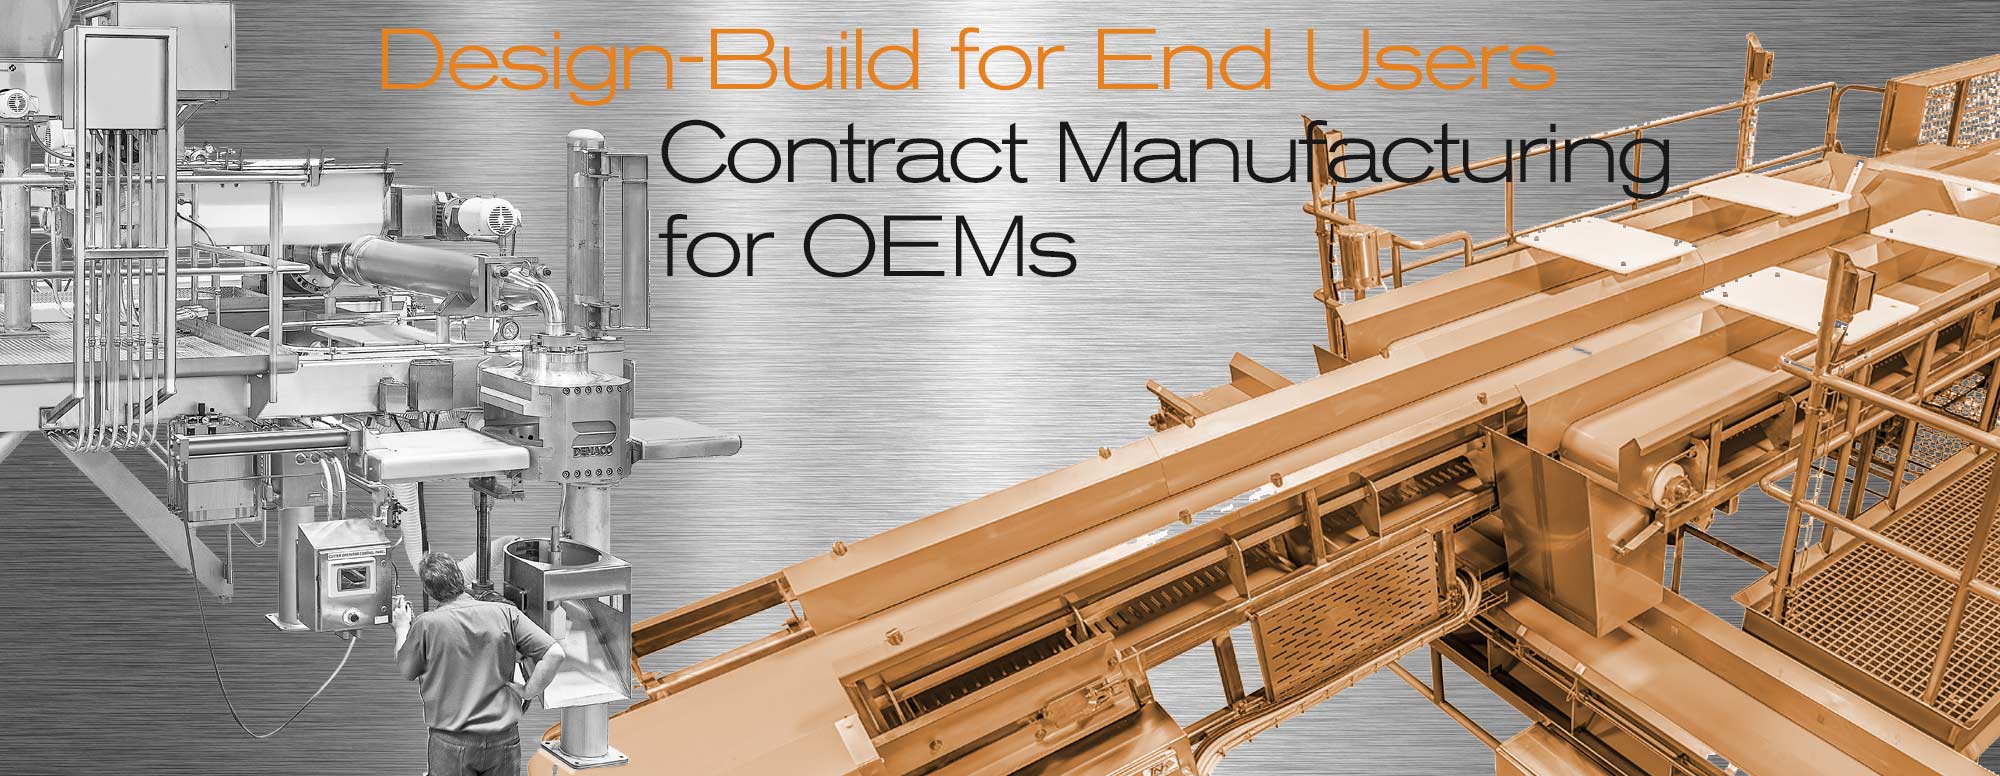 design build and contract build manufacturing